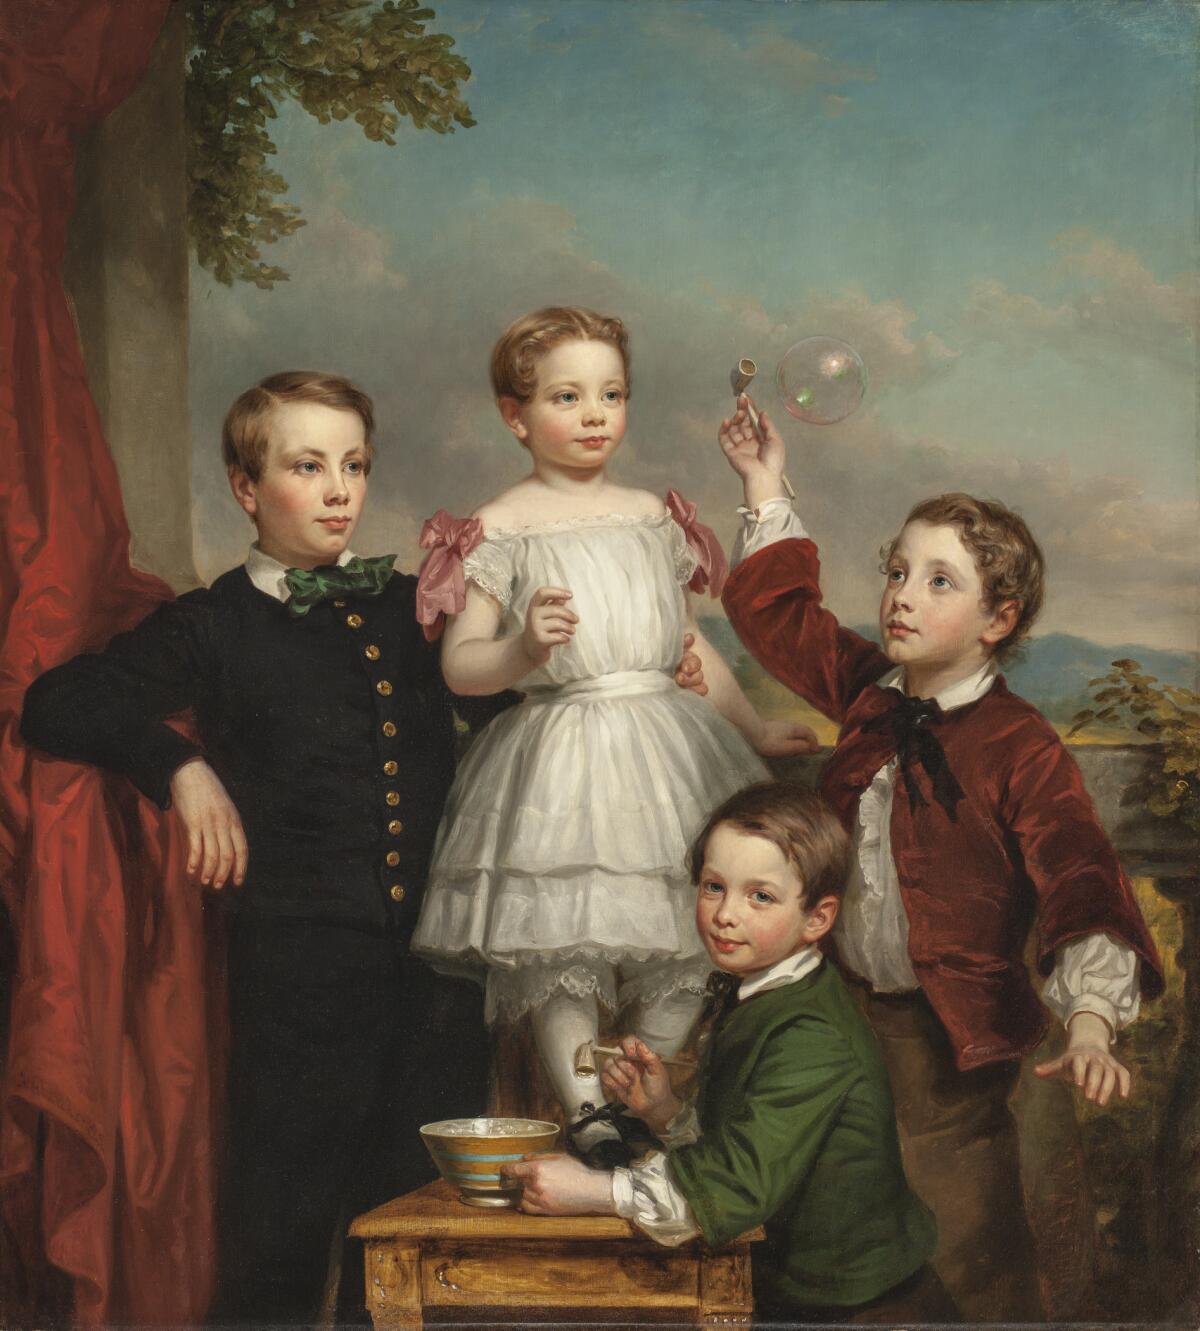 George Augustus Baker Jr., "Portrait of Children," 1853, oil on canvas. The youngsters play with soap pipes.